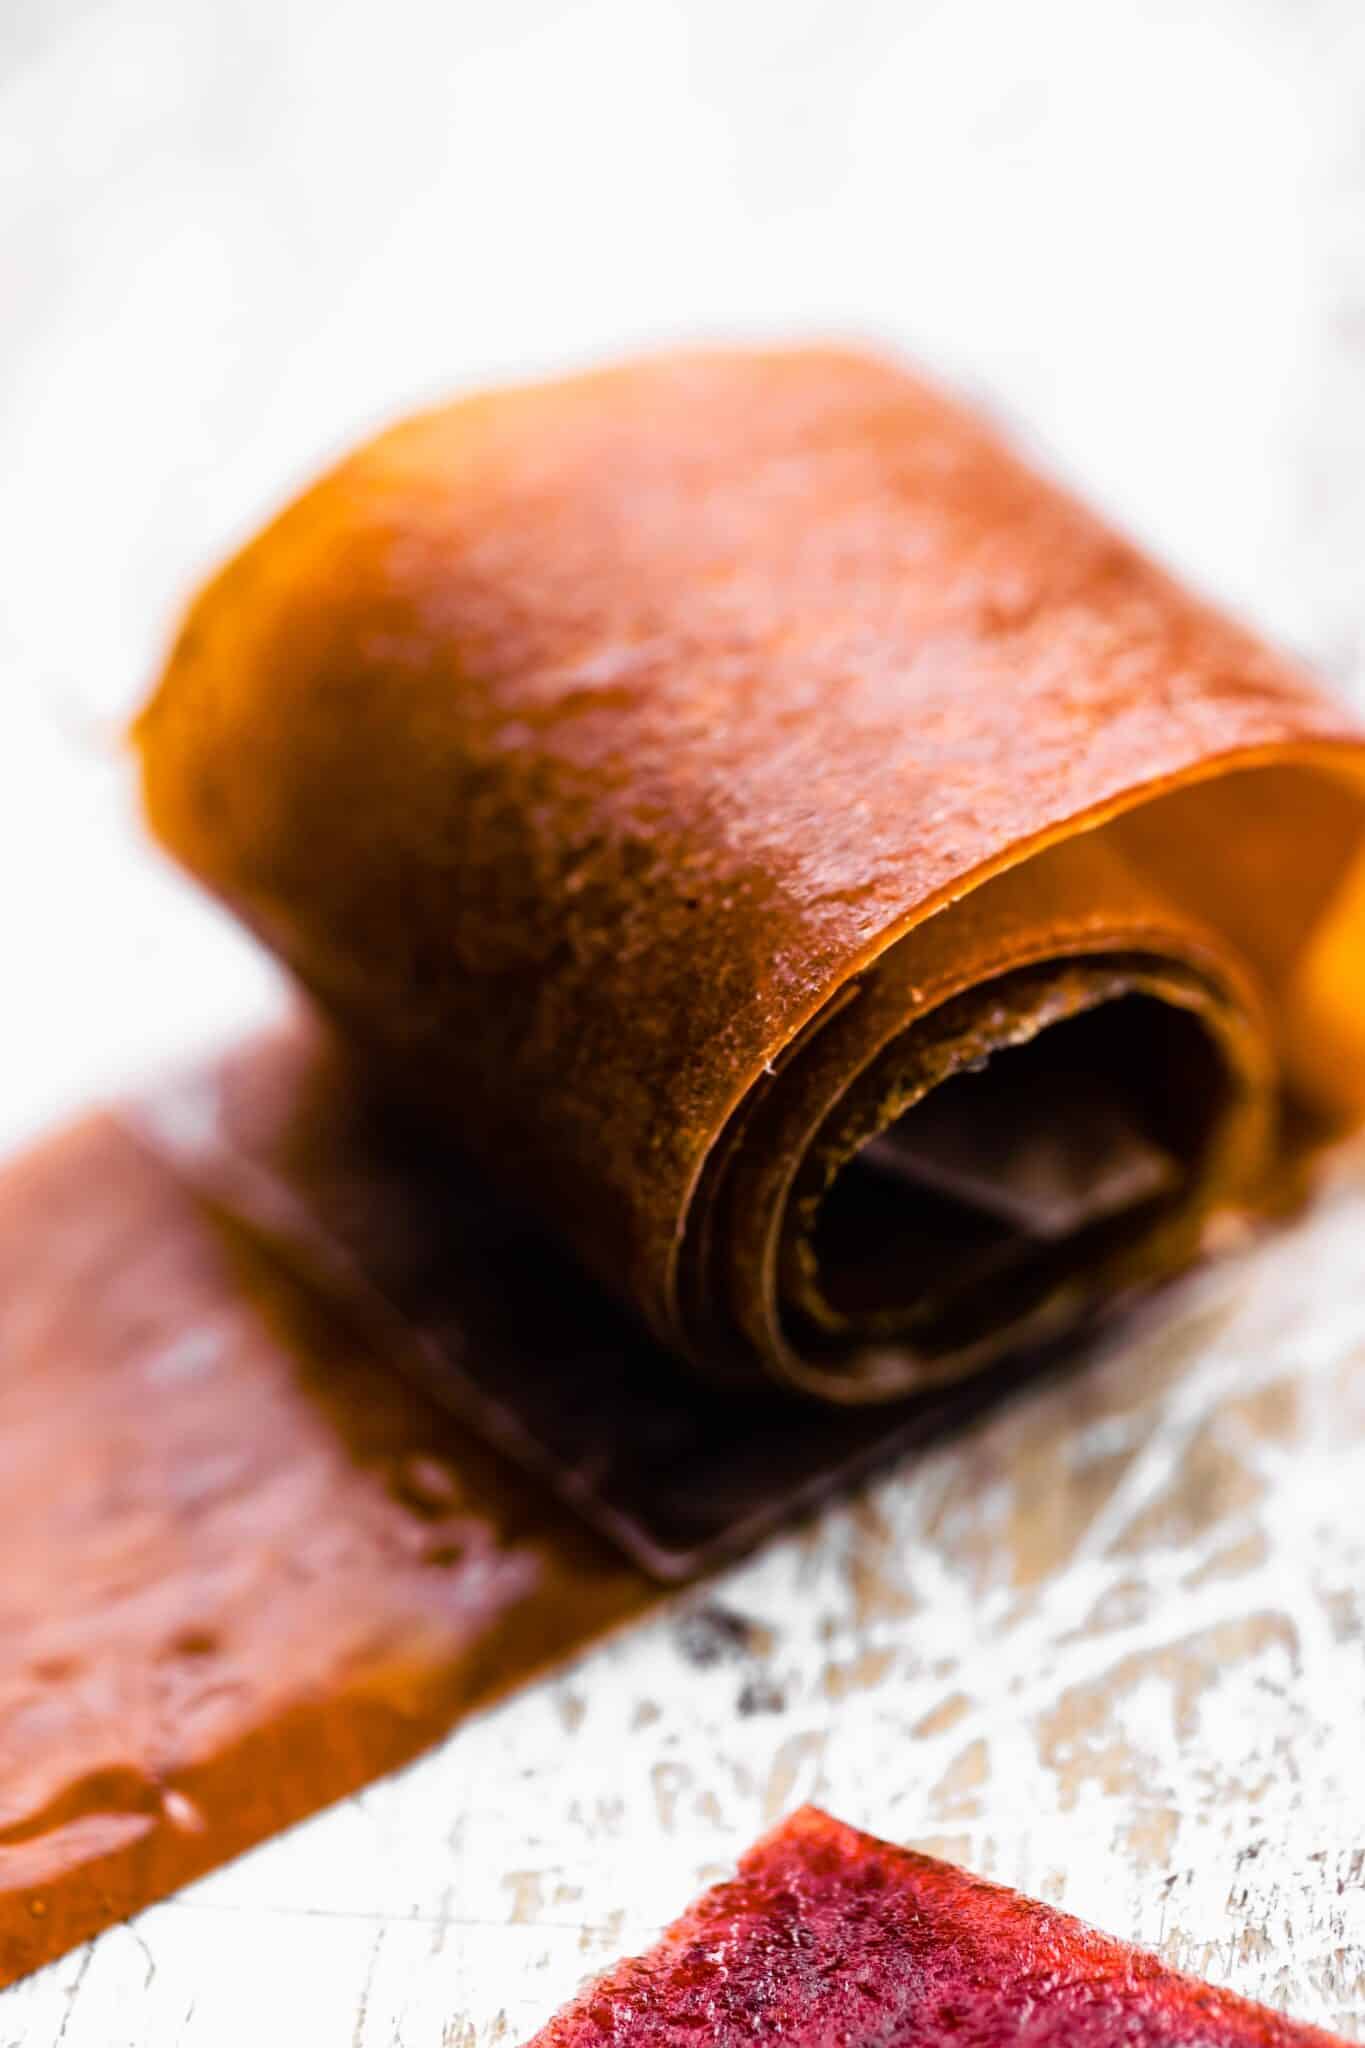 Up close photo of a homemade fruit roll up.